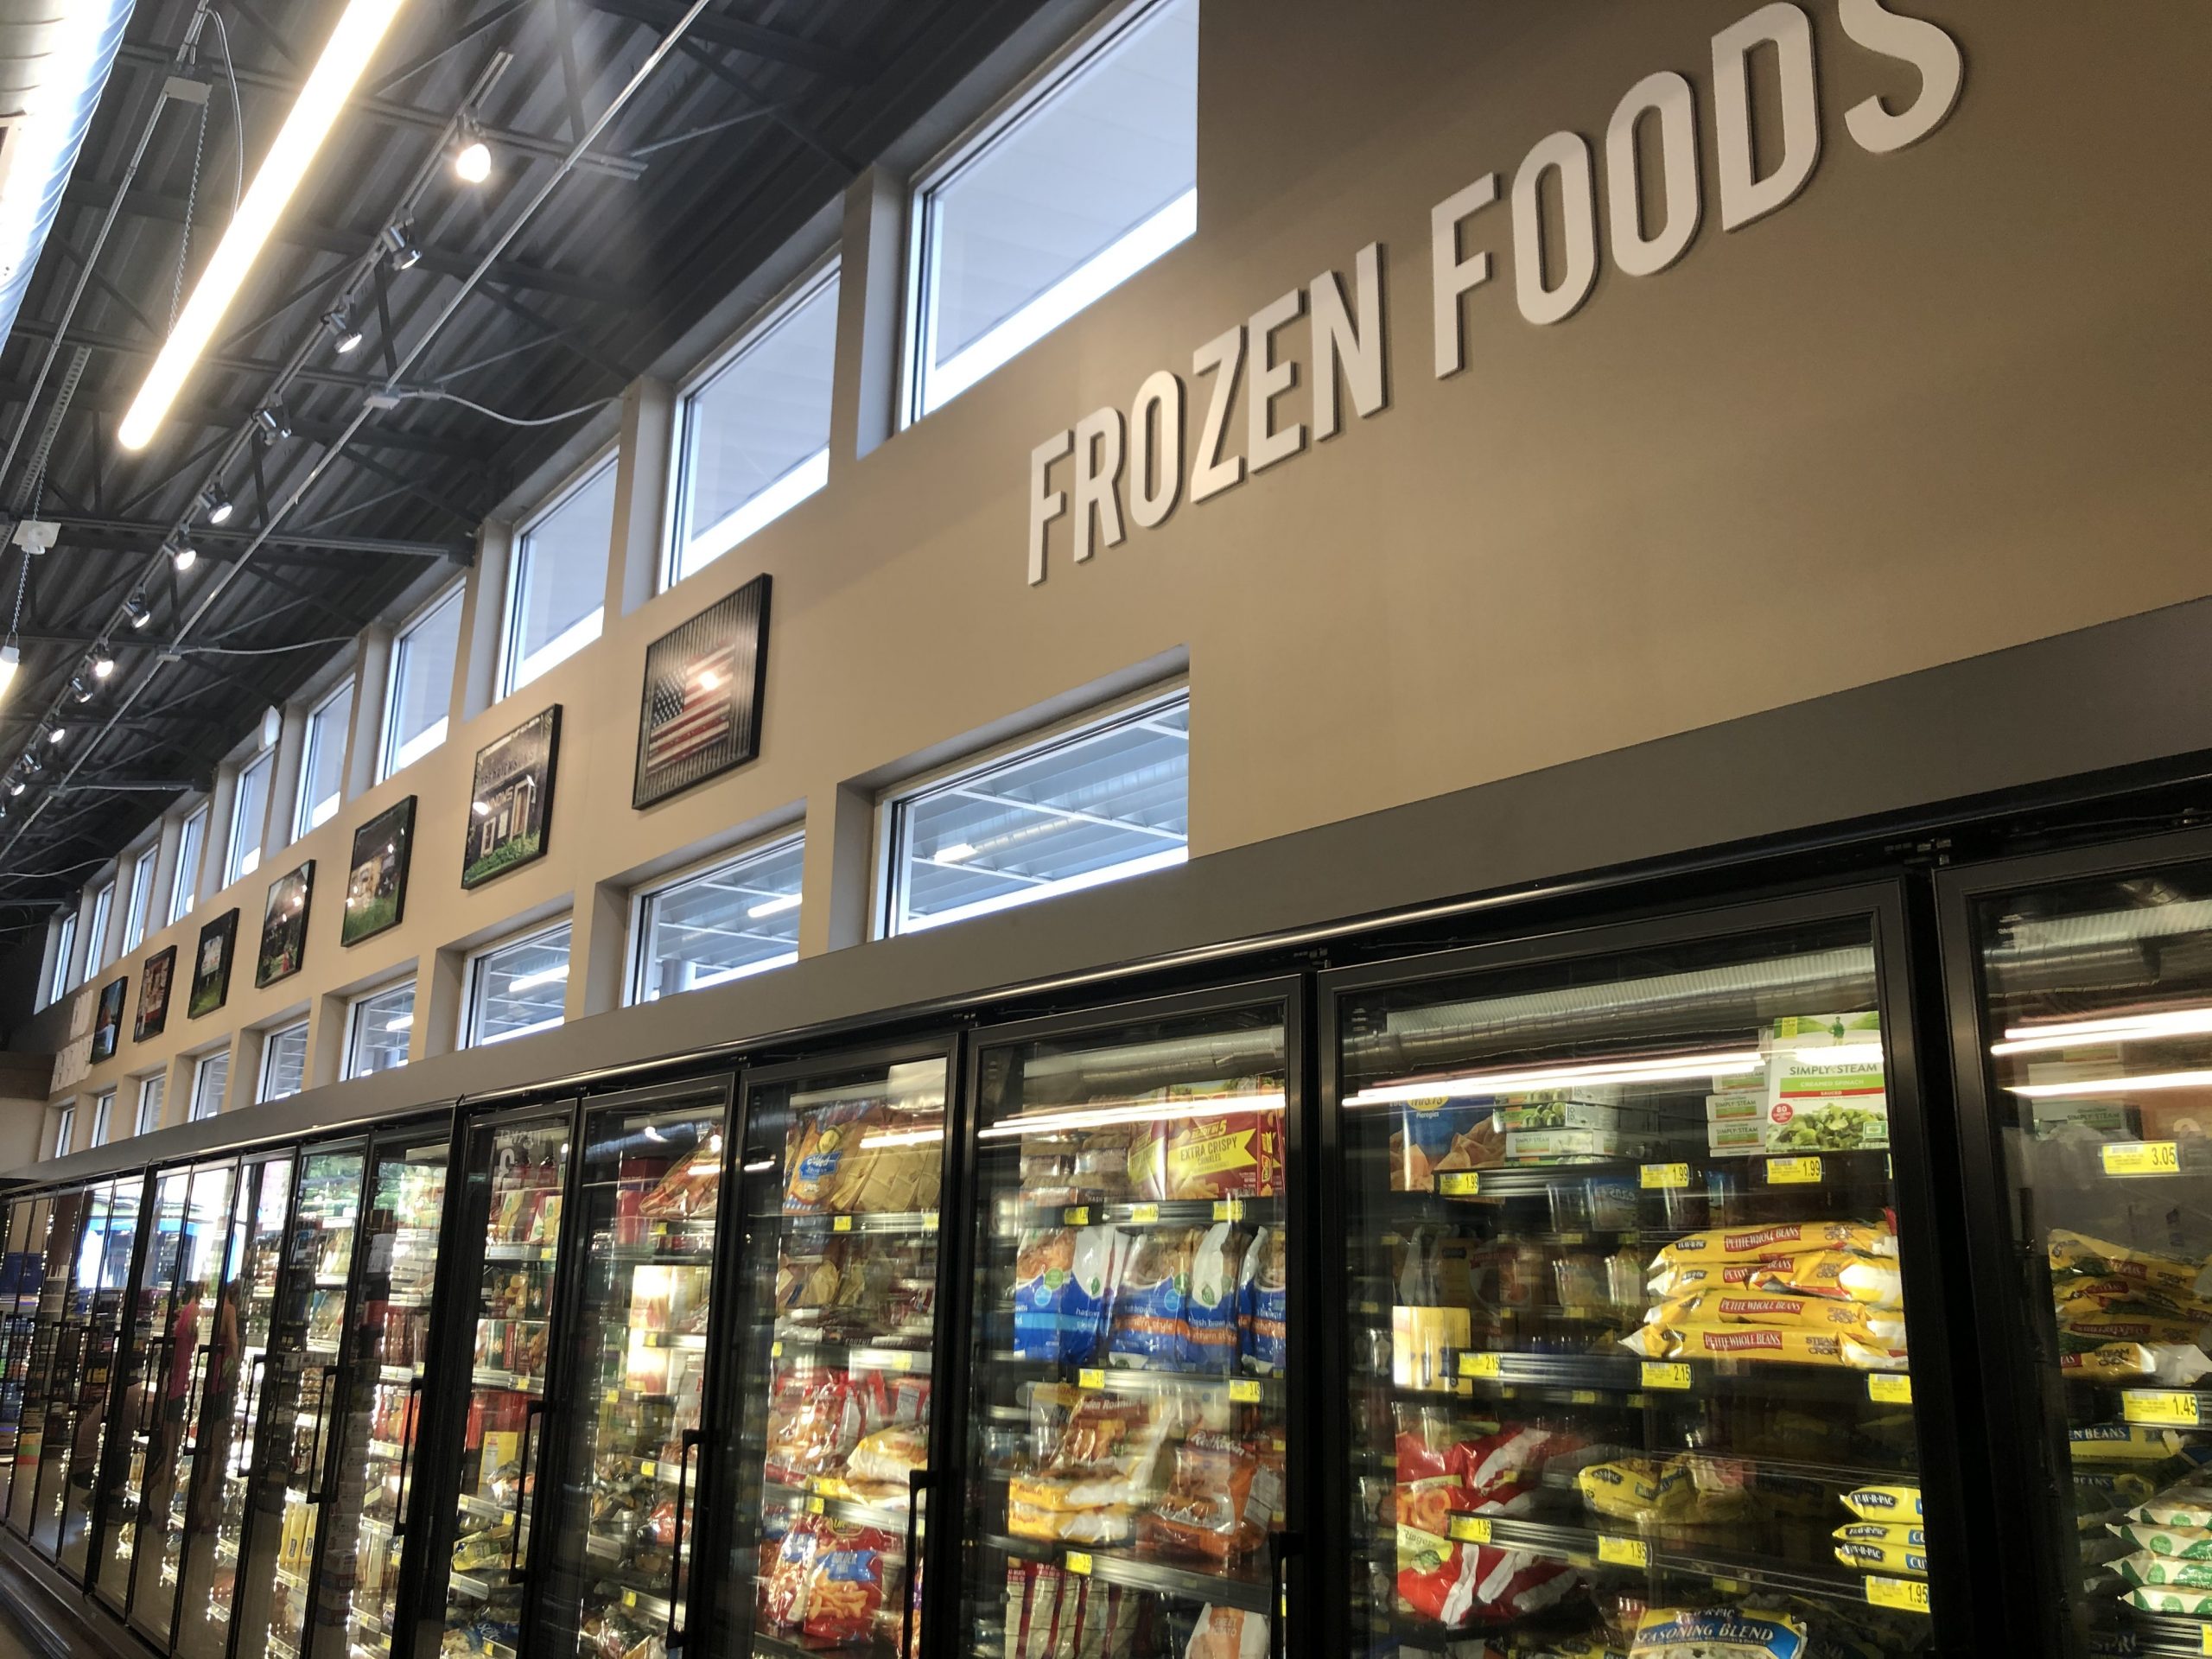 StoreMasters implemented an energy saving cooler update that considerably reduced the stores operating costs